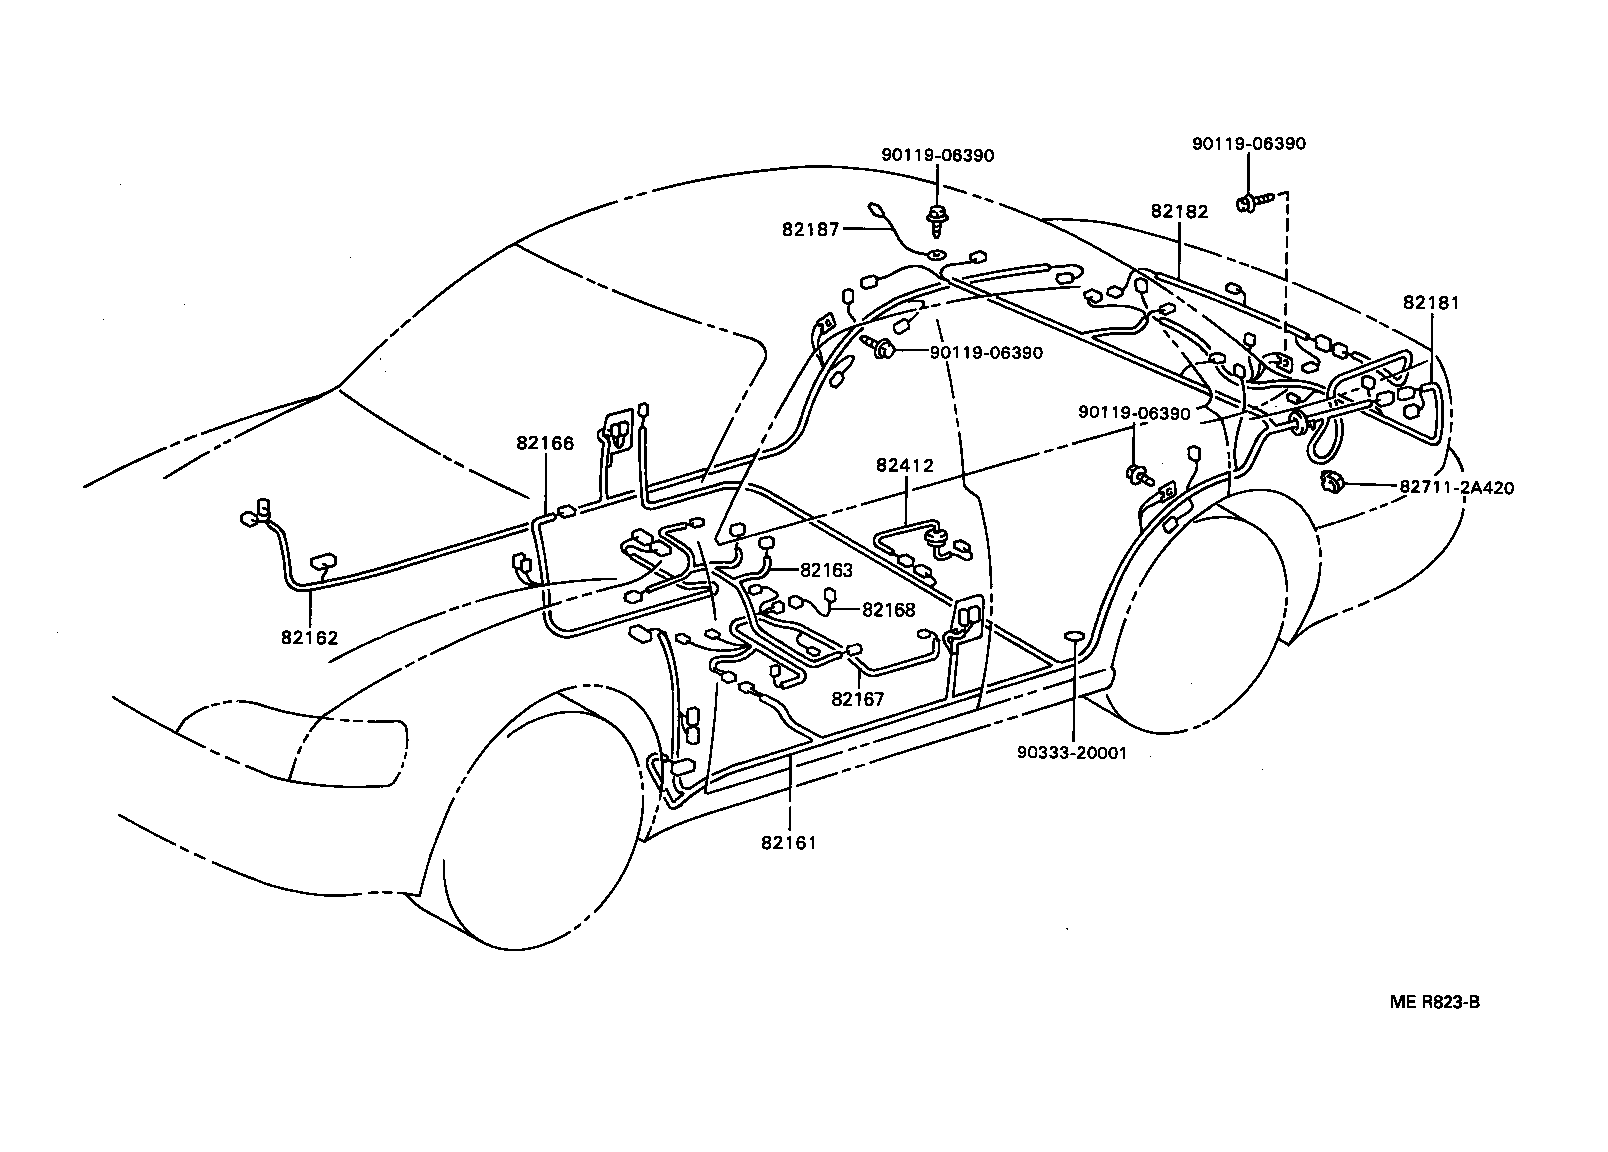  CAMRY SED |  WIRING CLAMP